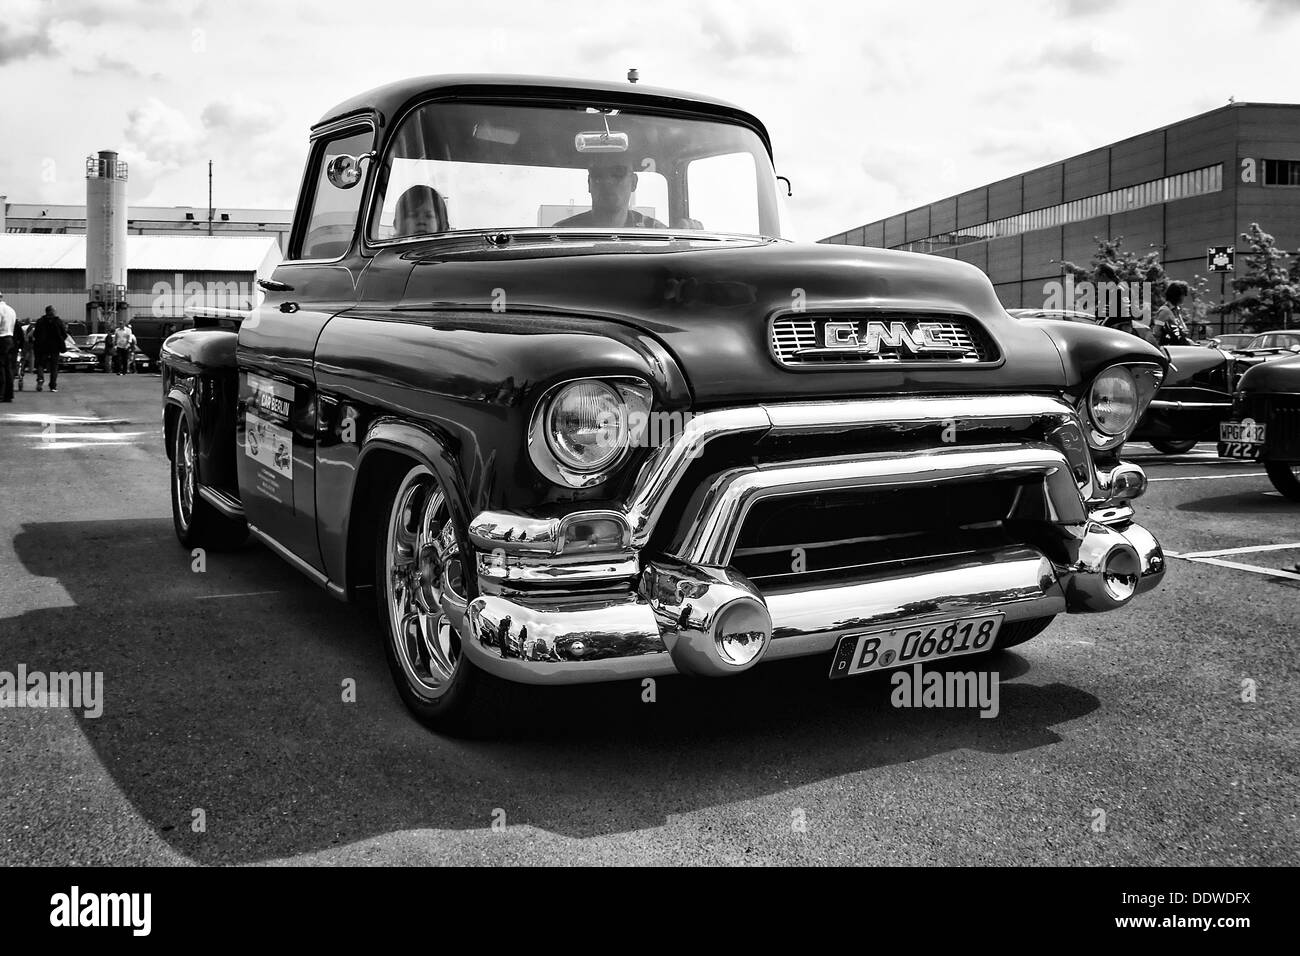 Car GMC Deluxe Cab Pickup Truck 350 V8 TH350 (black and white), Stock Photo